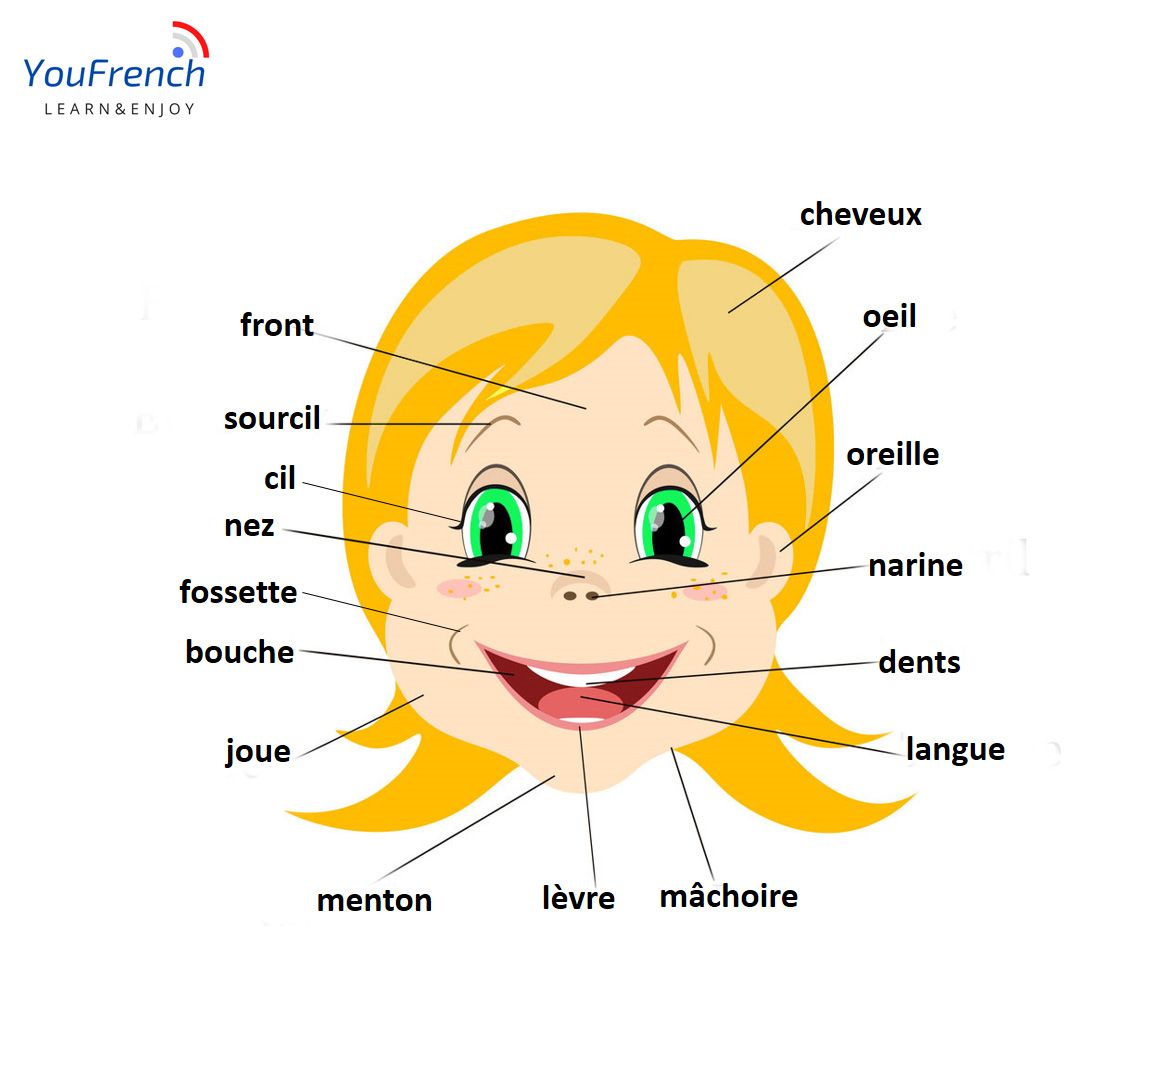 learn-the-body-parts-in-french-listen-to-audio-files-to-practice